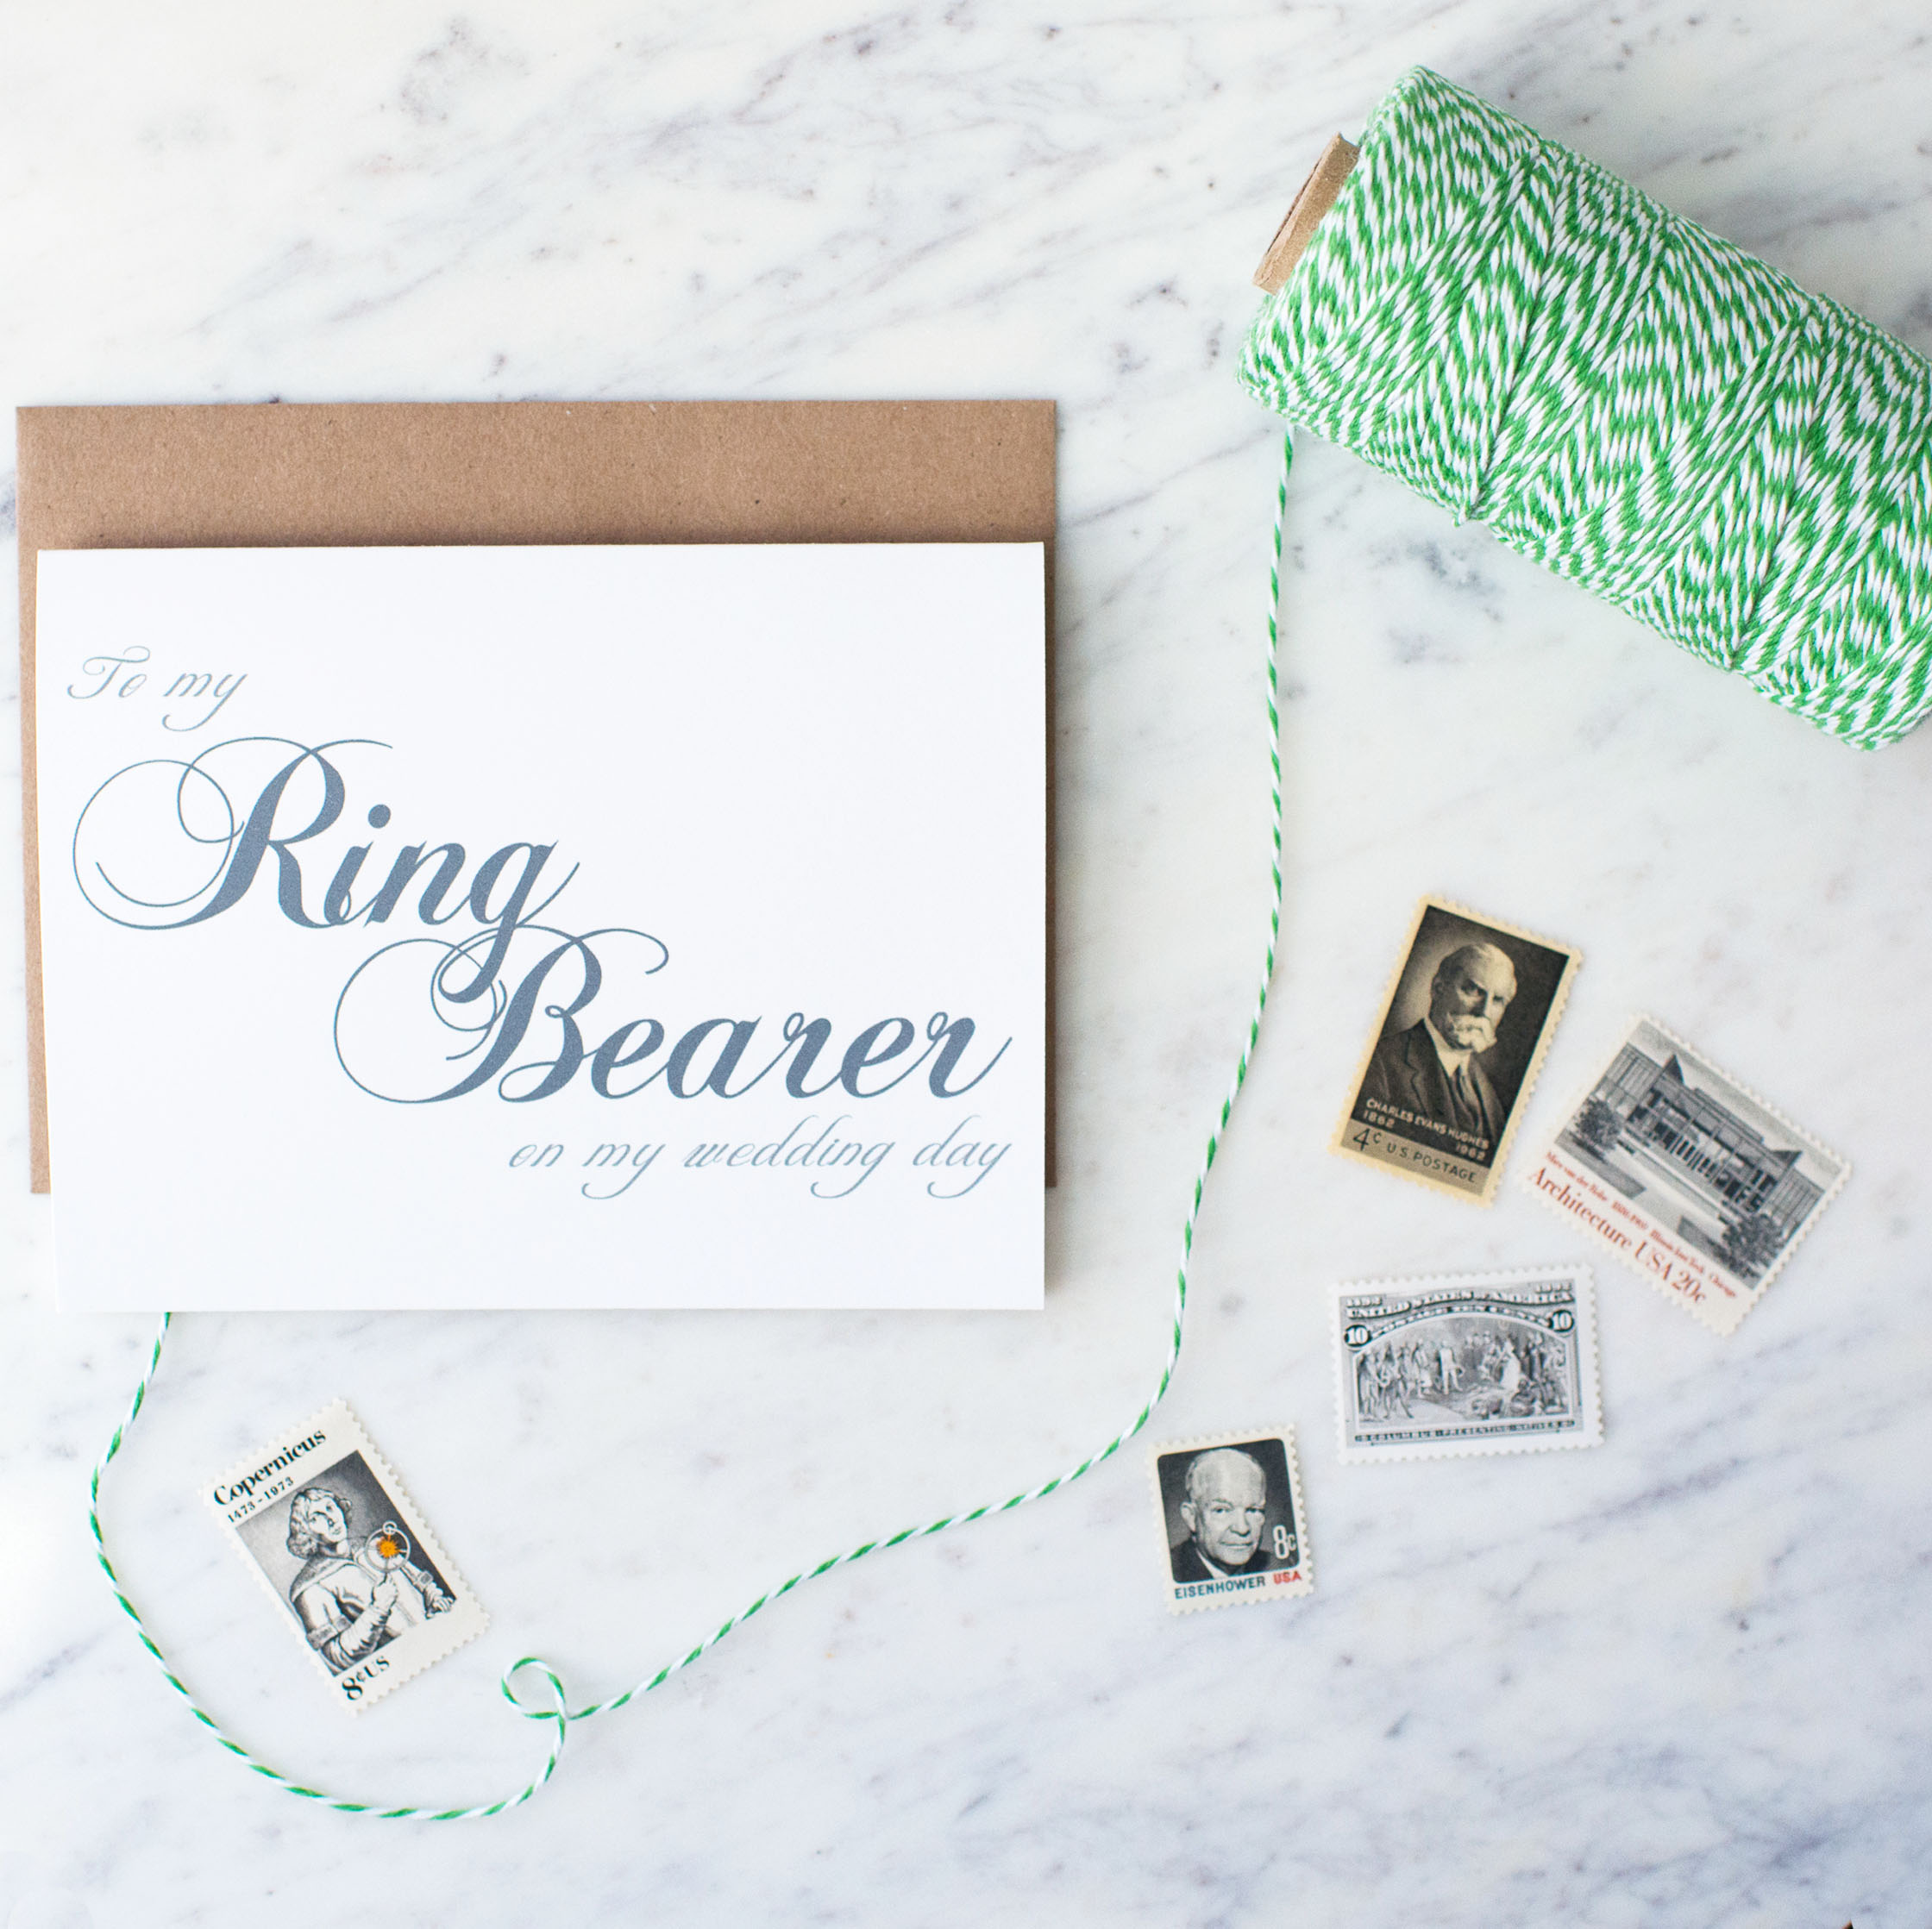 To My Ring Bearer On My Wedding Day Card